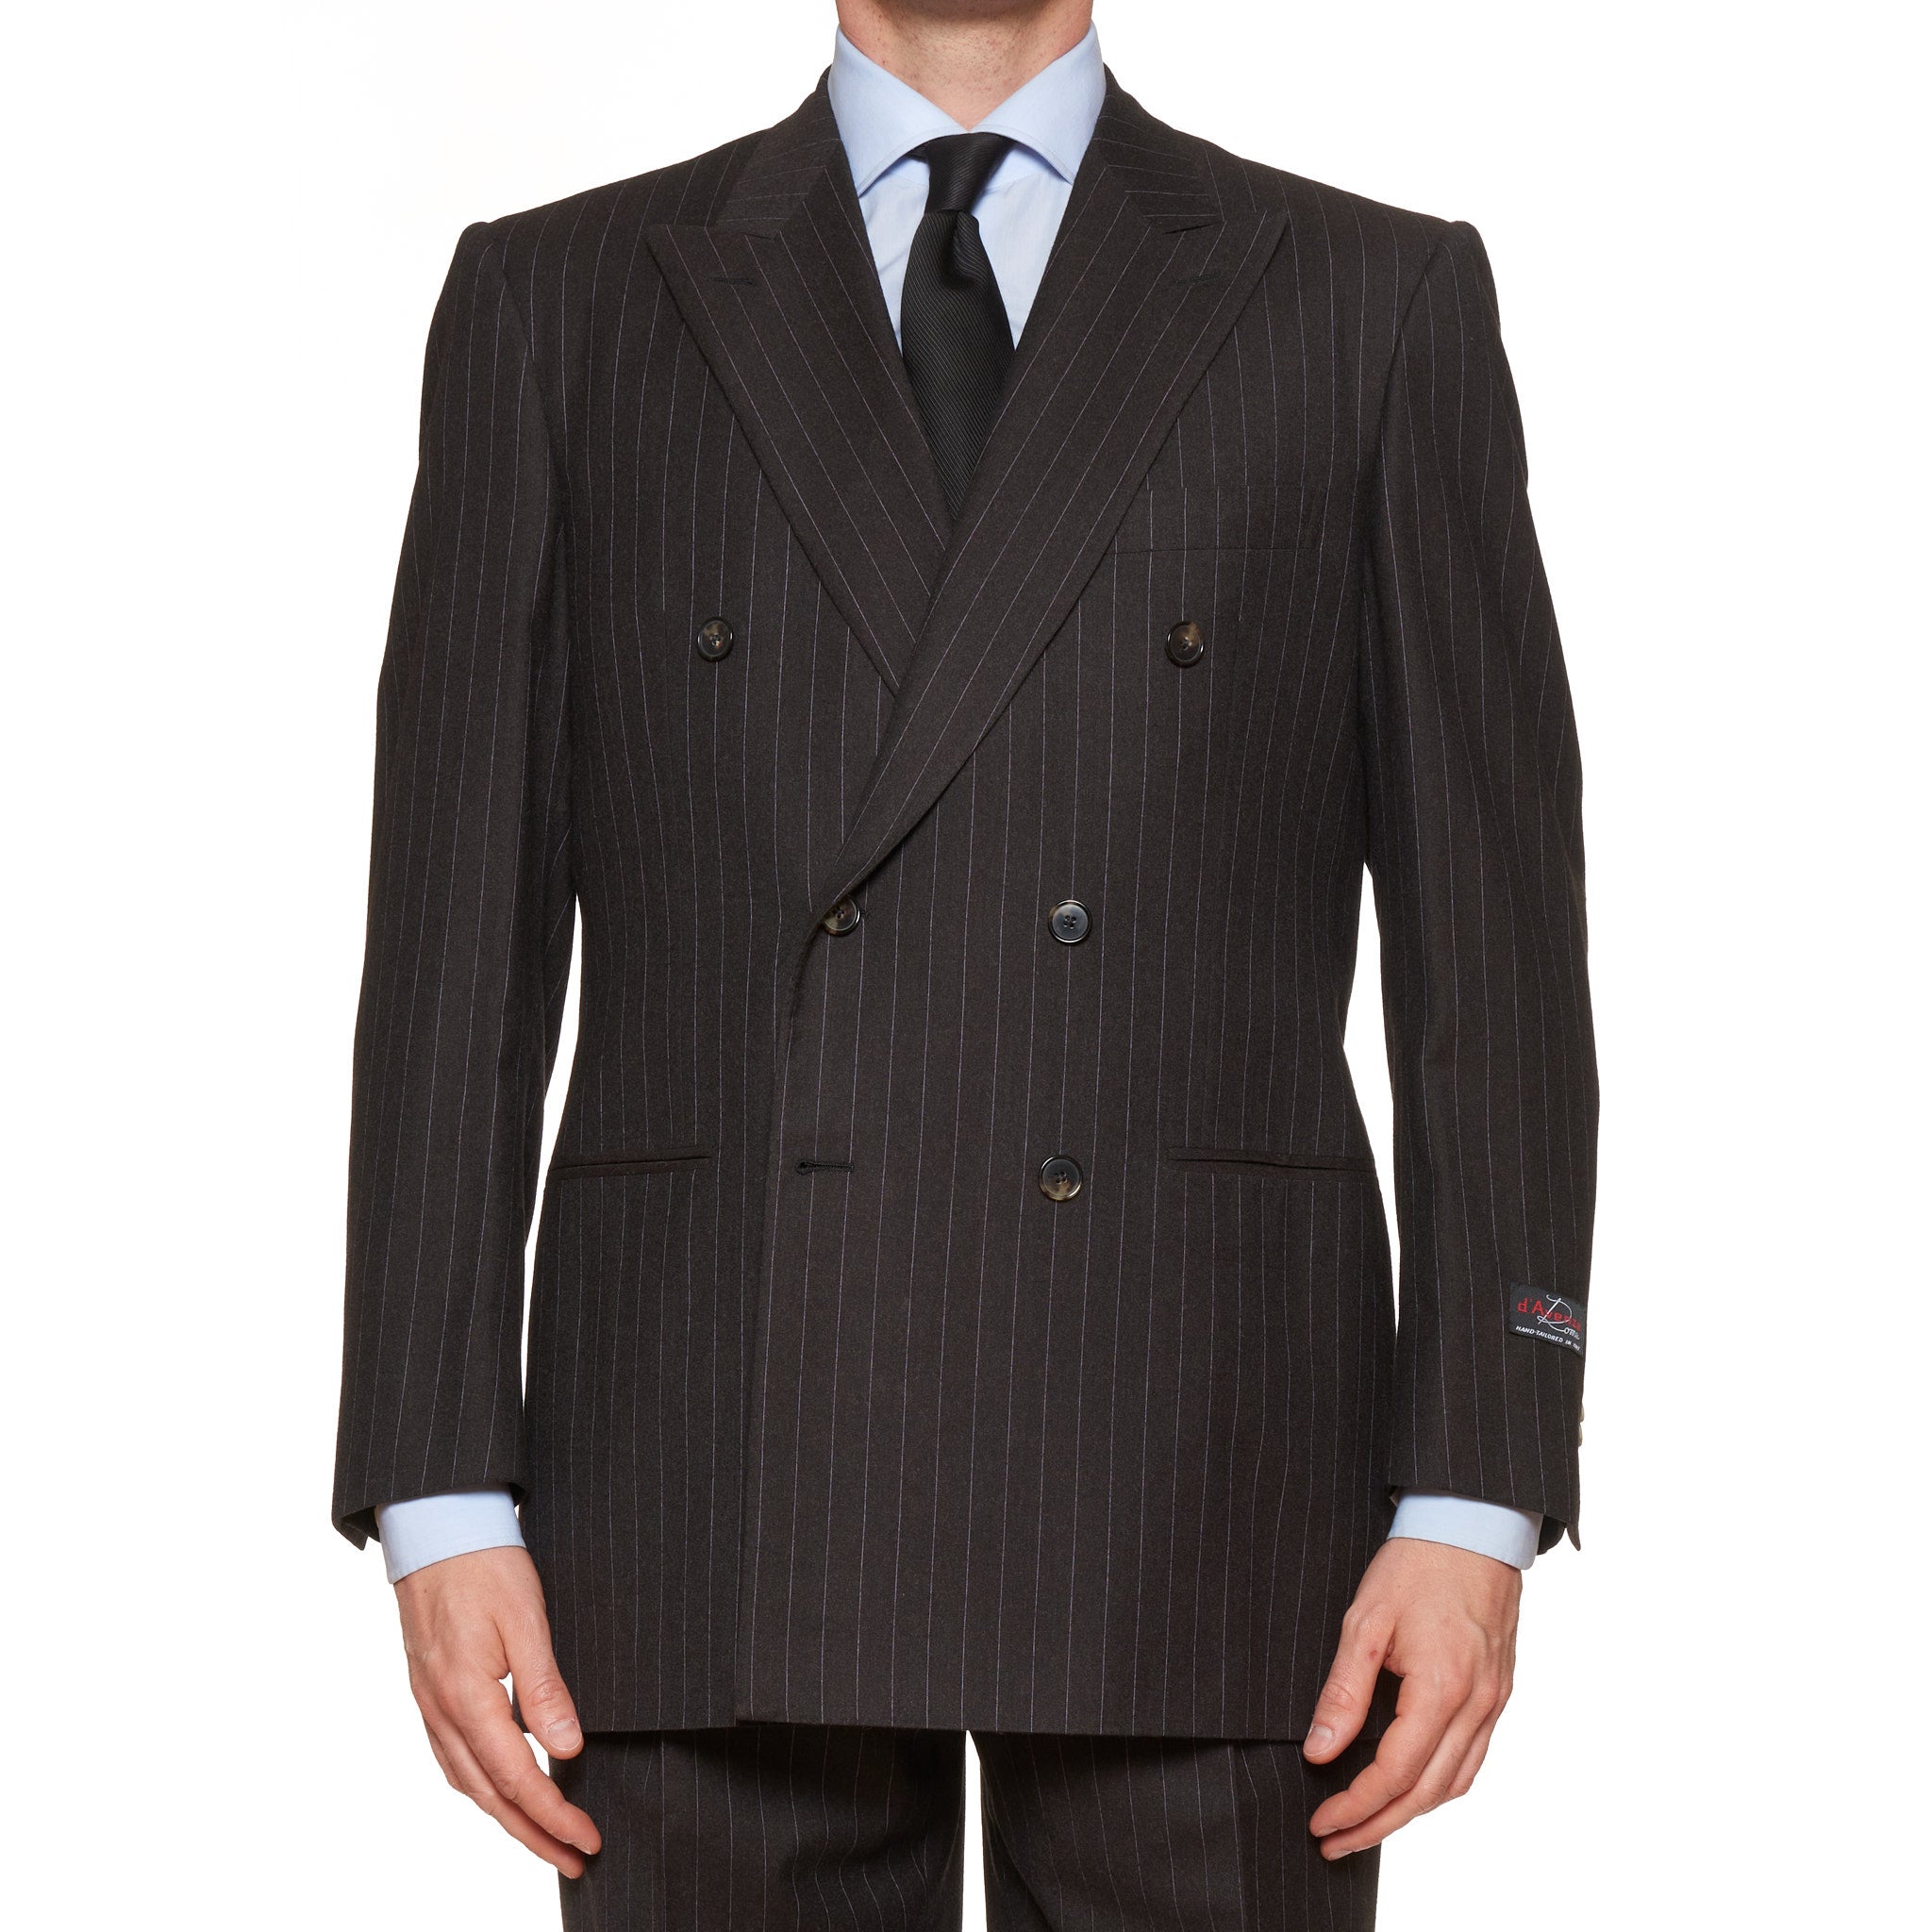 D'AVENZA Handmade Brown Striped Wool Super 130's Flannel DB Suit EU 50 NEW US 40 D'AVENZA